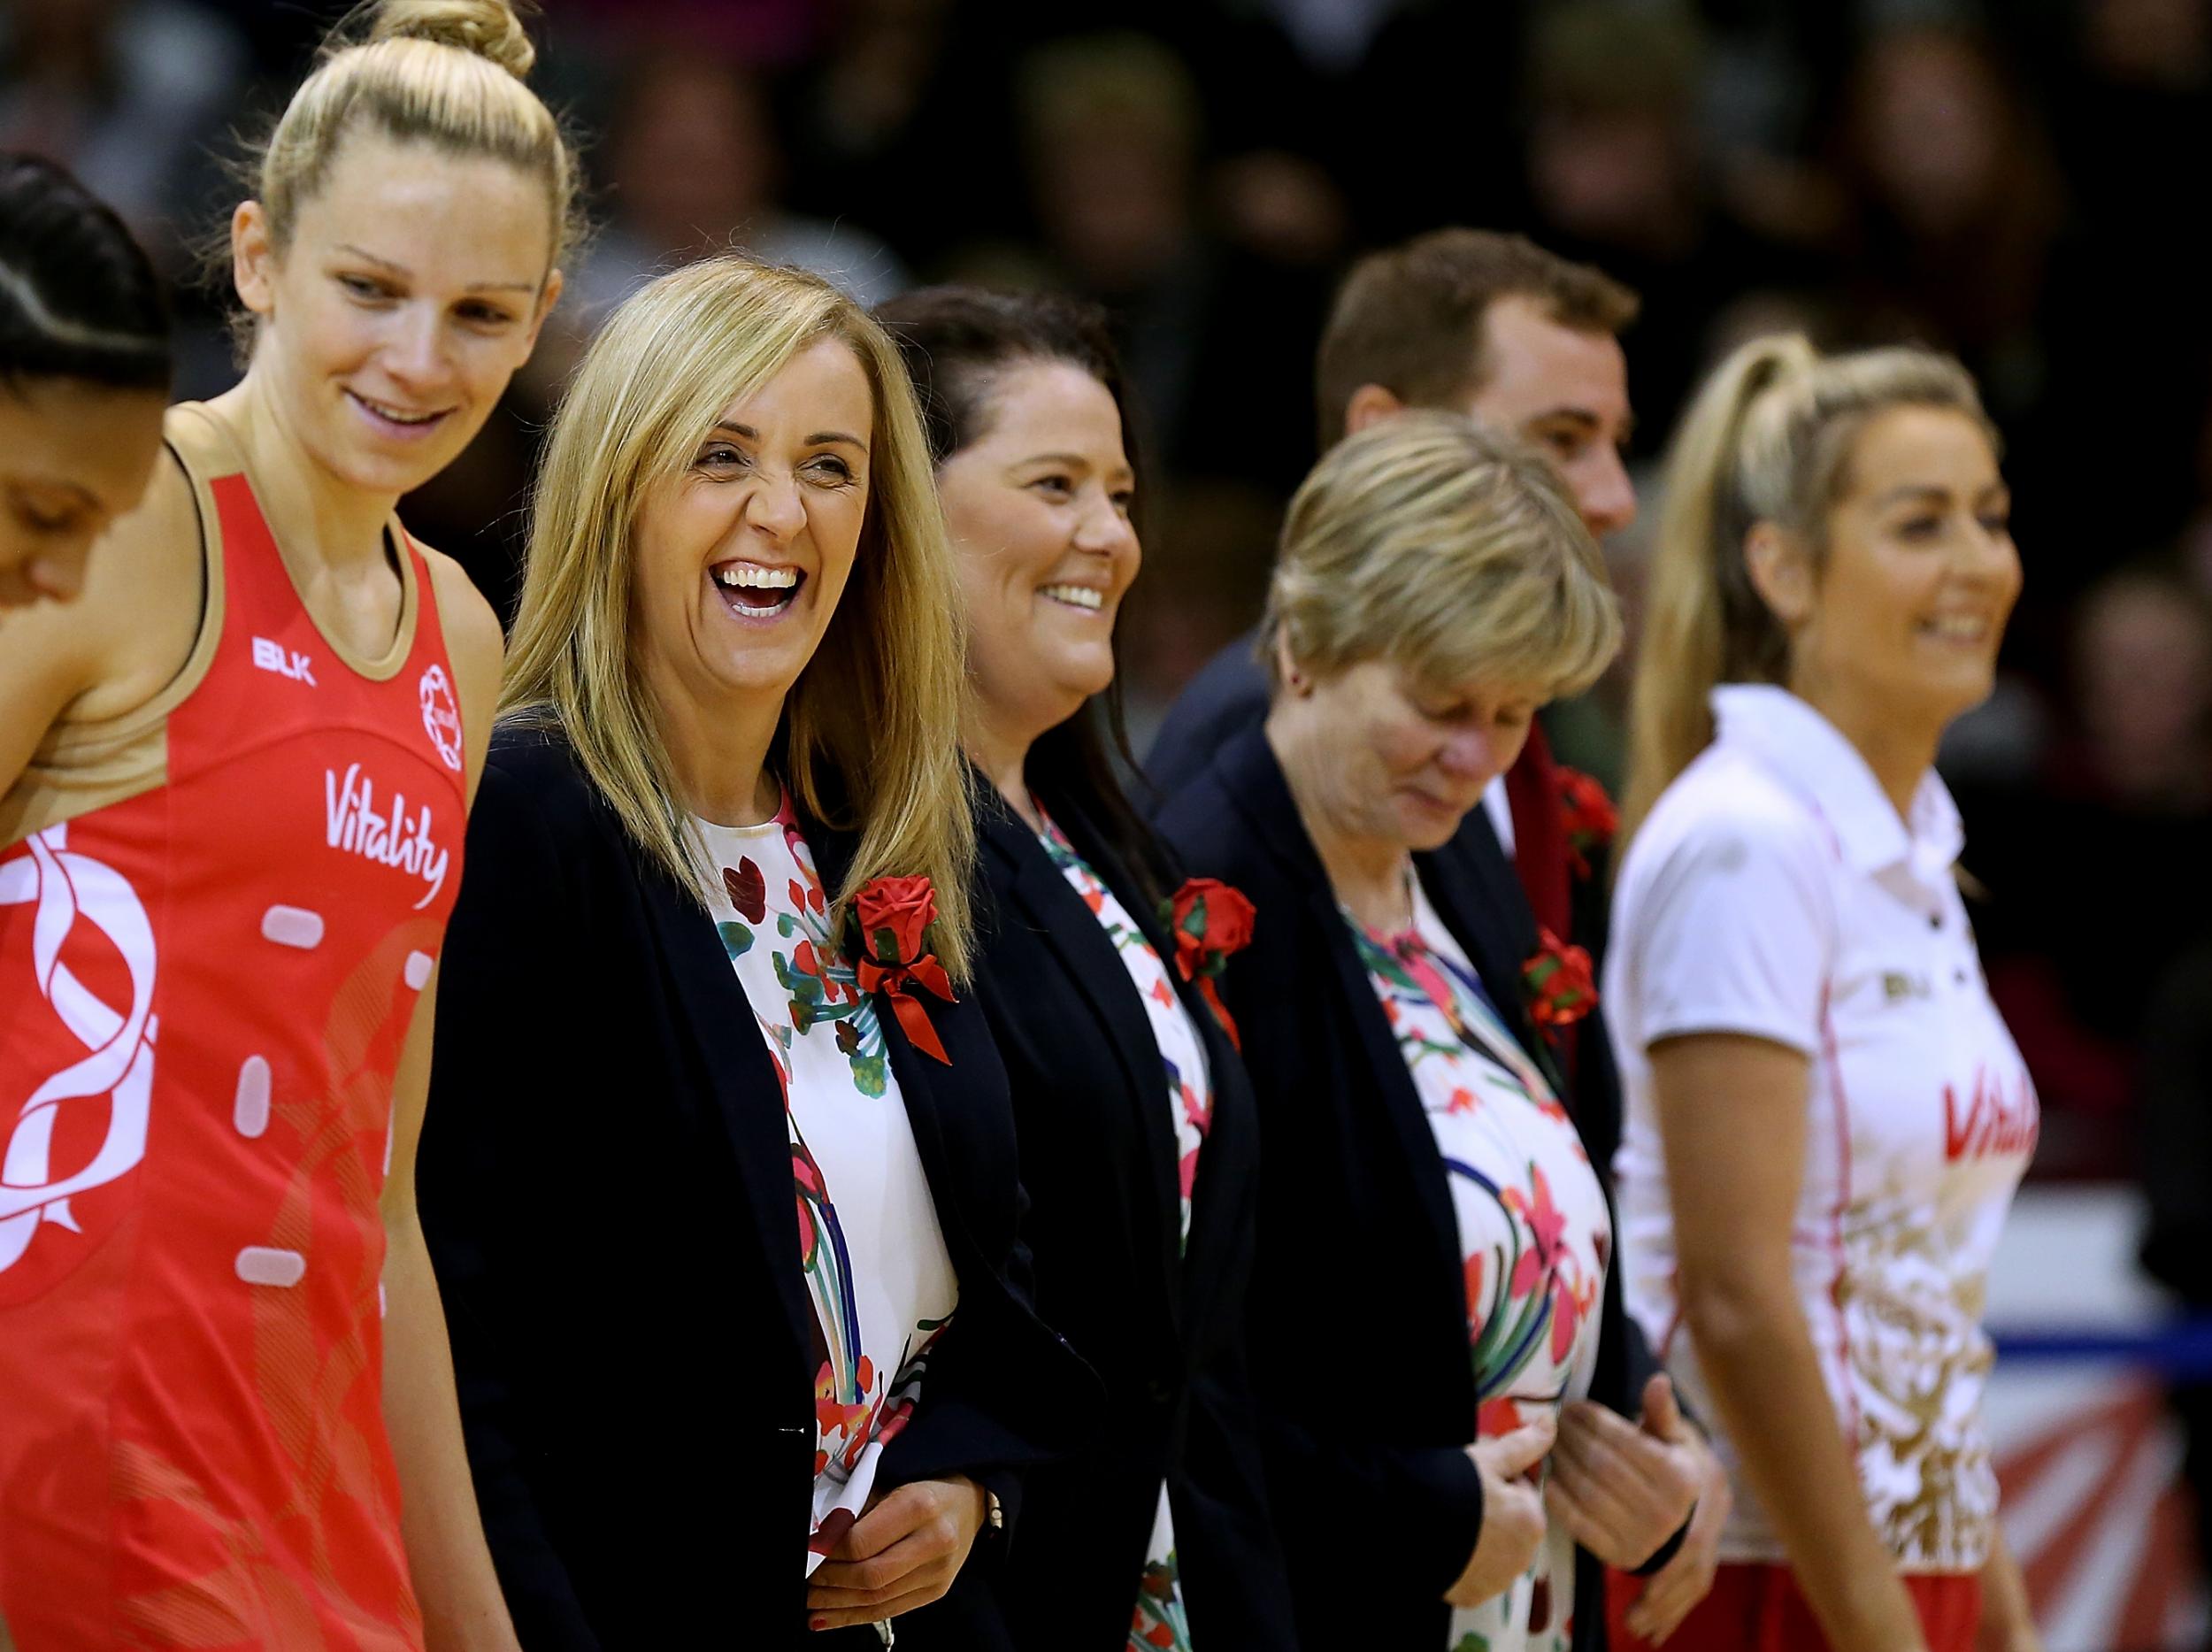 Tracey Neville coaches the England netball team